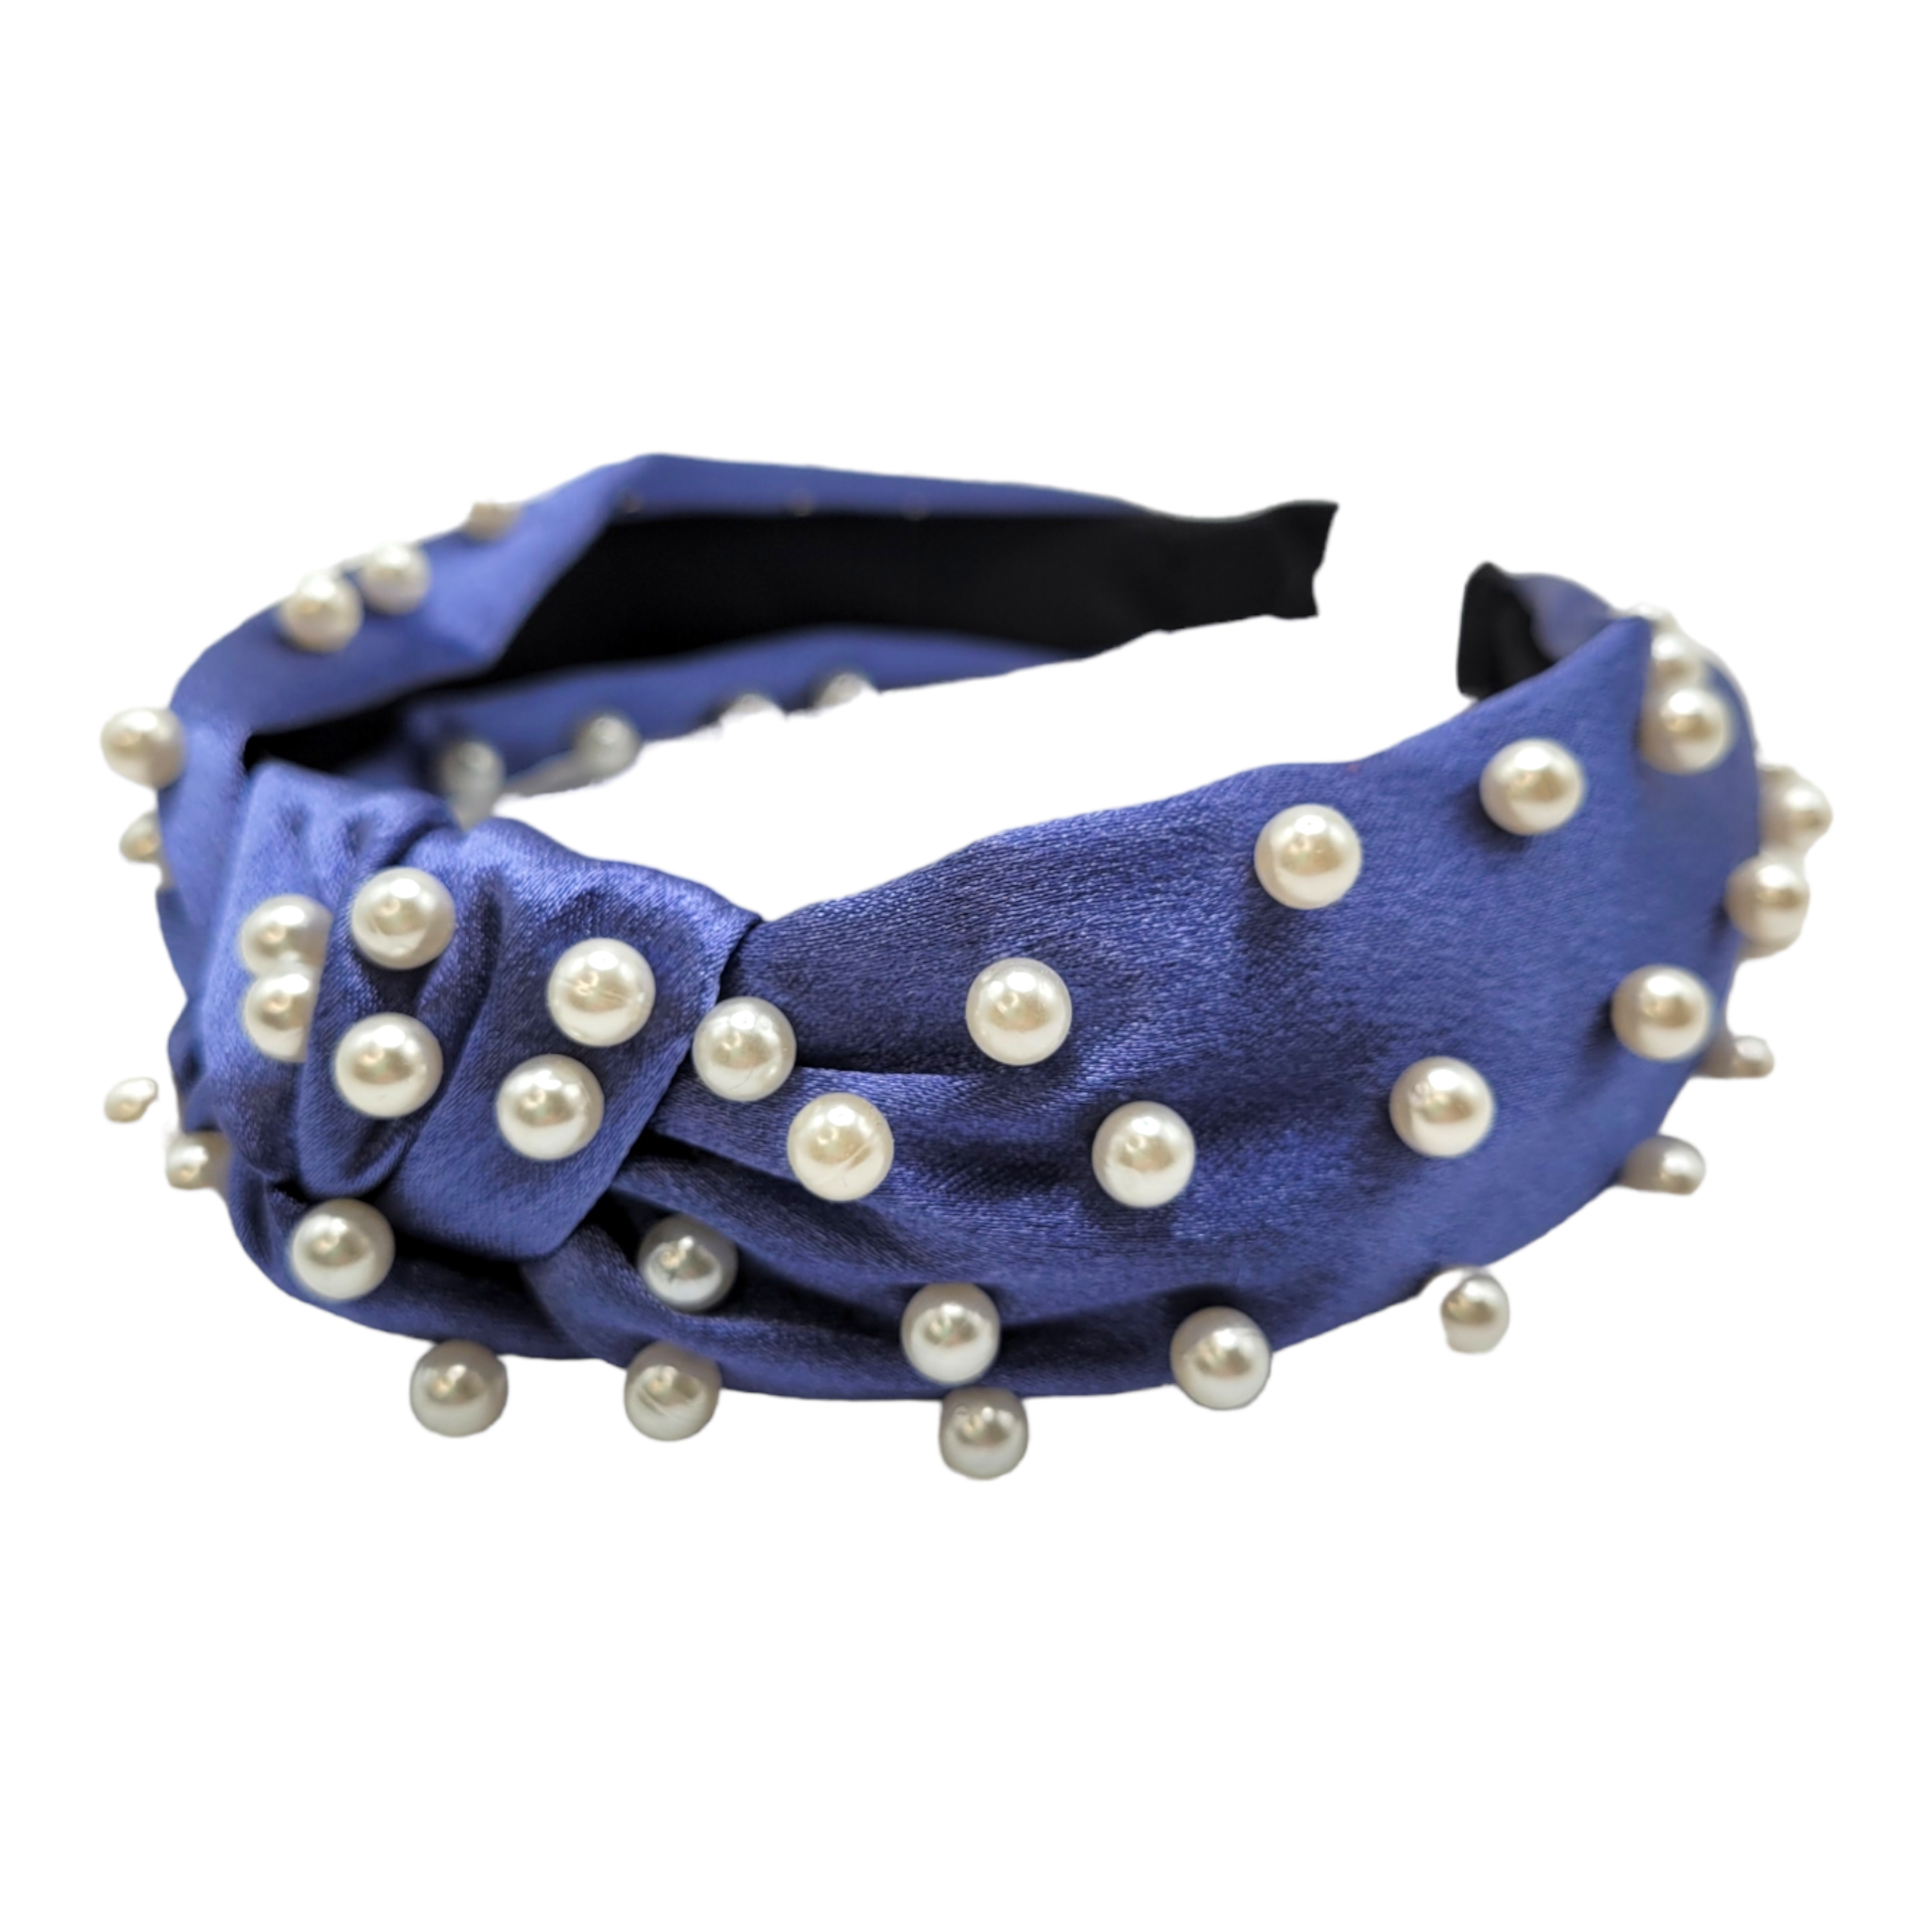 Blue Pearl Embellished Top Knot Headband-Accessories-LouisGeorge Boutique-LouisGeorge Boutique, Women’s Fashion Boutique Located in Trussville, Alabama